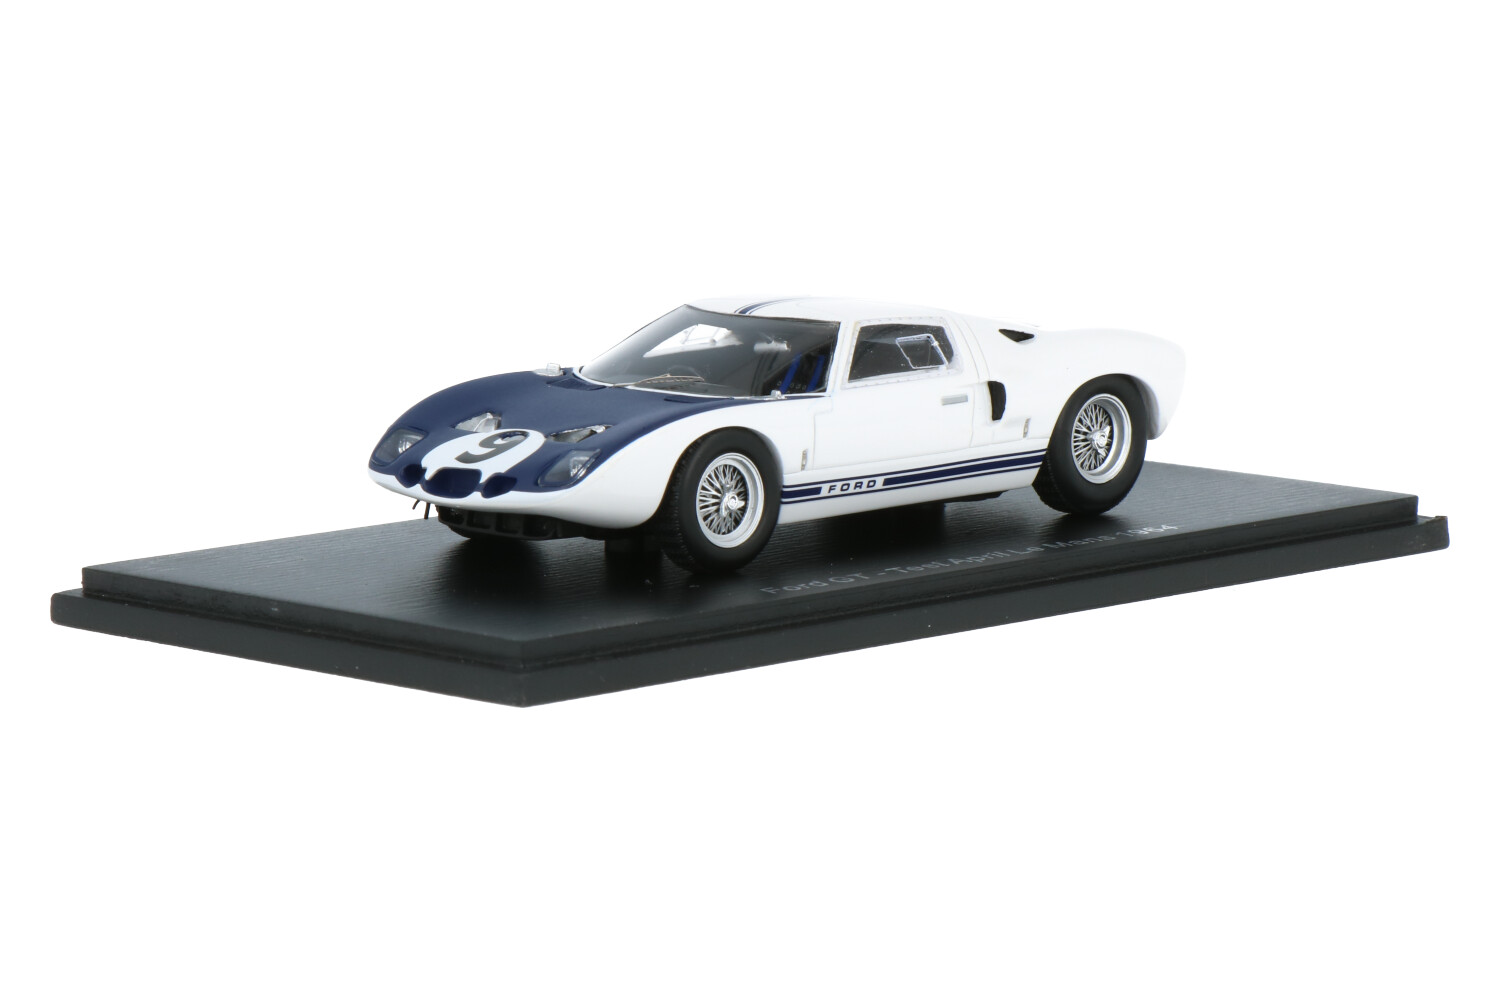 Ford-GT-Test-S7953_13159580006979537Ford-GT-Test-S7953_Houseofmodelcars_.jpg